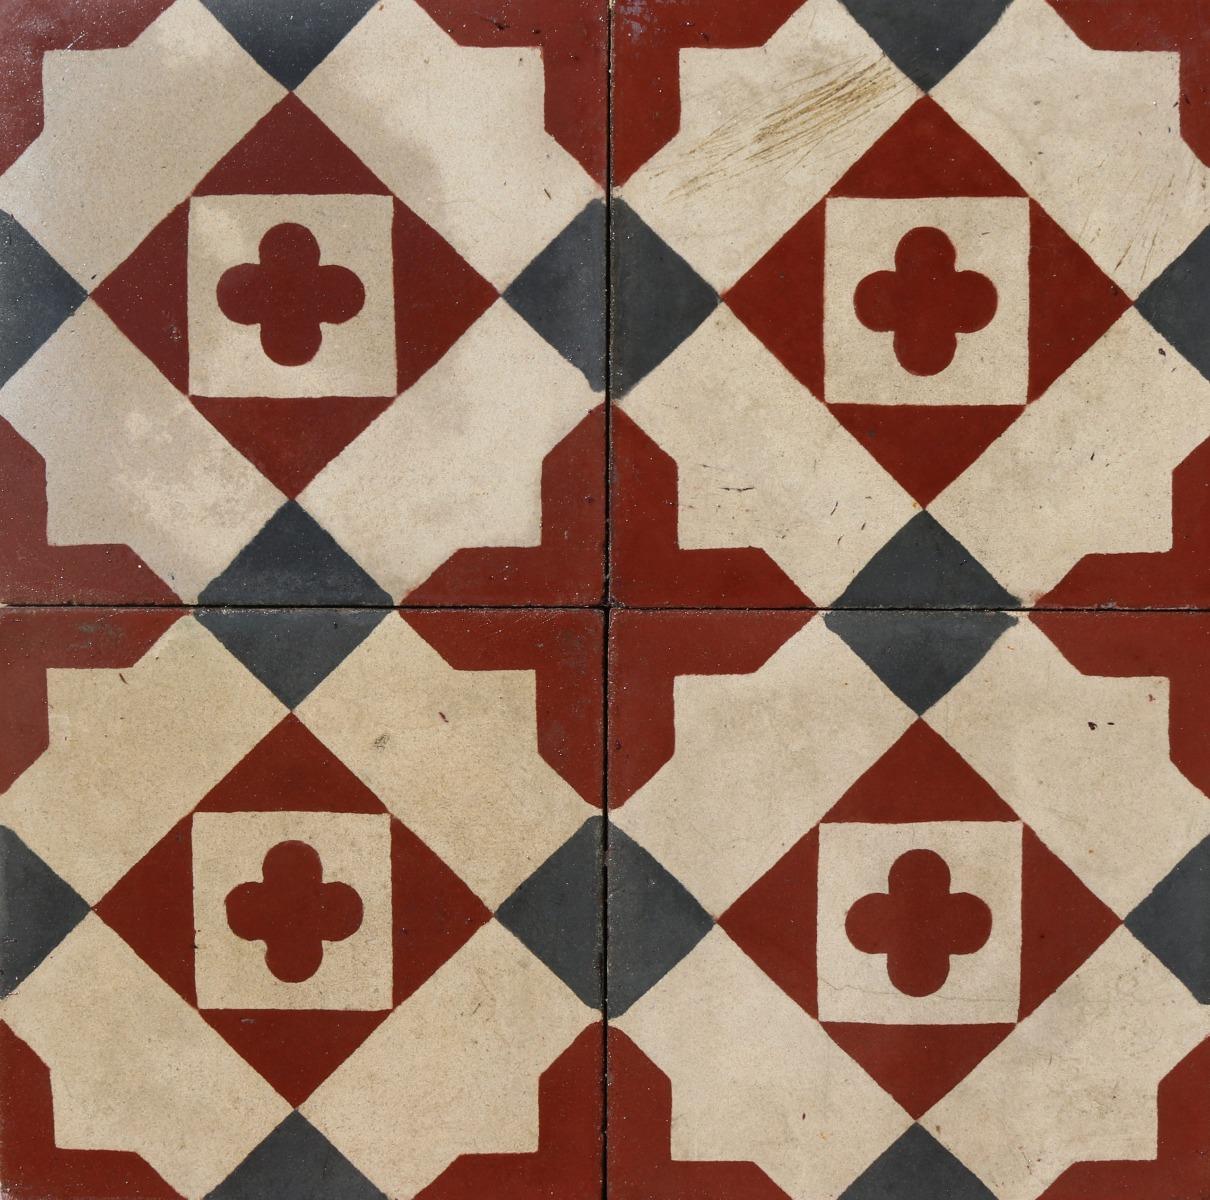 A small batch of 37 reclaimed encaustic cement floor tiles. These tiles will cover 1.48 m2 or 15.9 ft2. They are suitable for use on floors or walls.

Small chips associated with transport and storage. Unused. Good overall condition. Small chips,